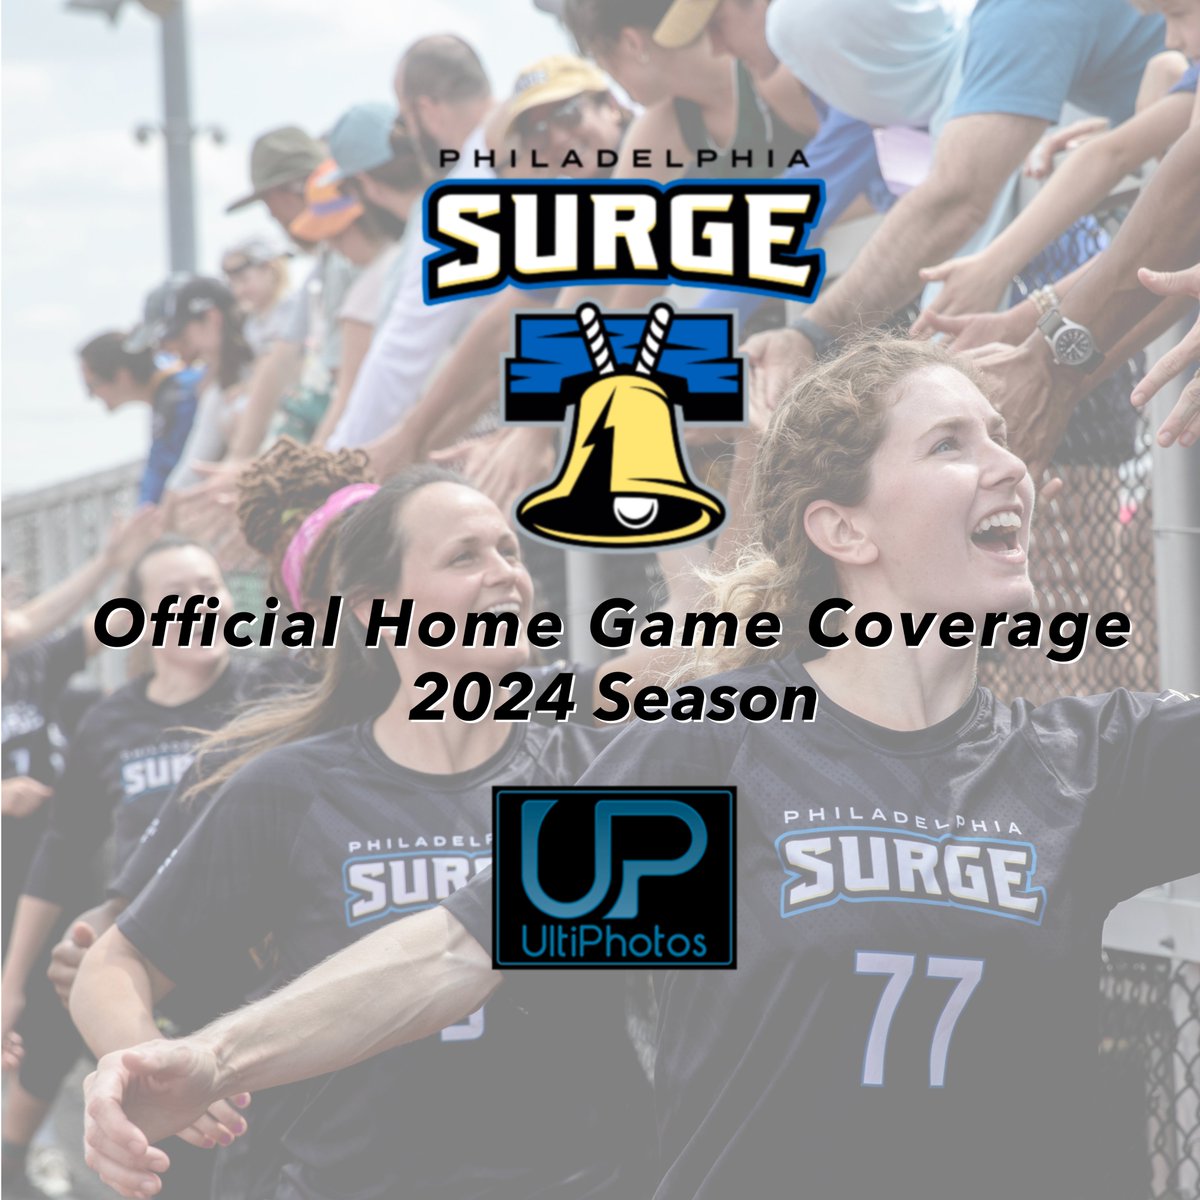 We are thrilled to announce that UltiPhotos will be providing Official Coverage for Philly Surge at their 2024 season home games! 🔔⚡️ @Philly_Surge @PremierUltimate